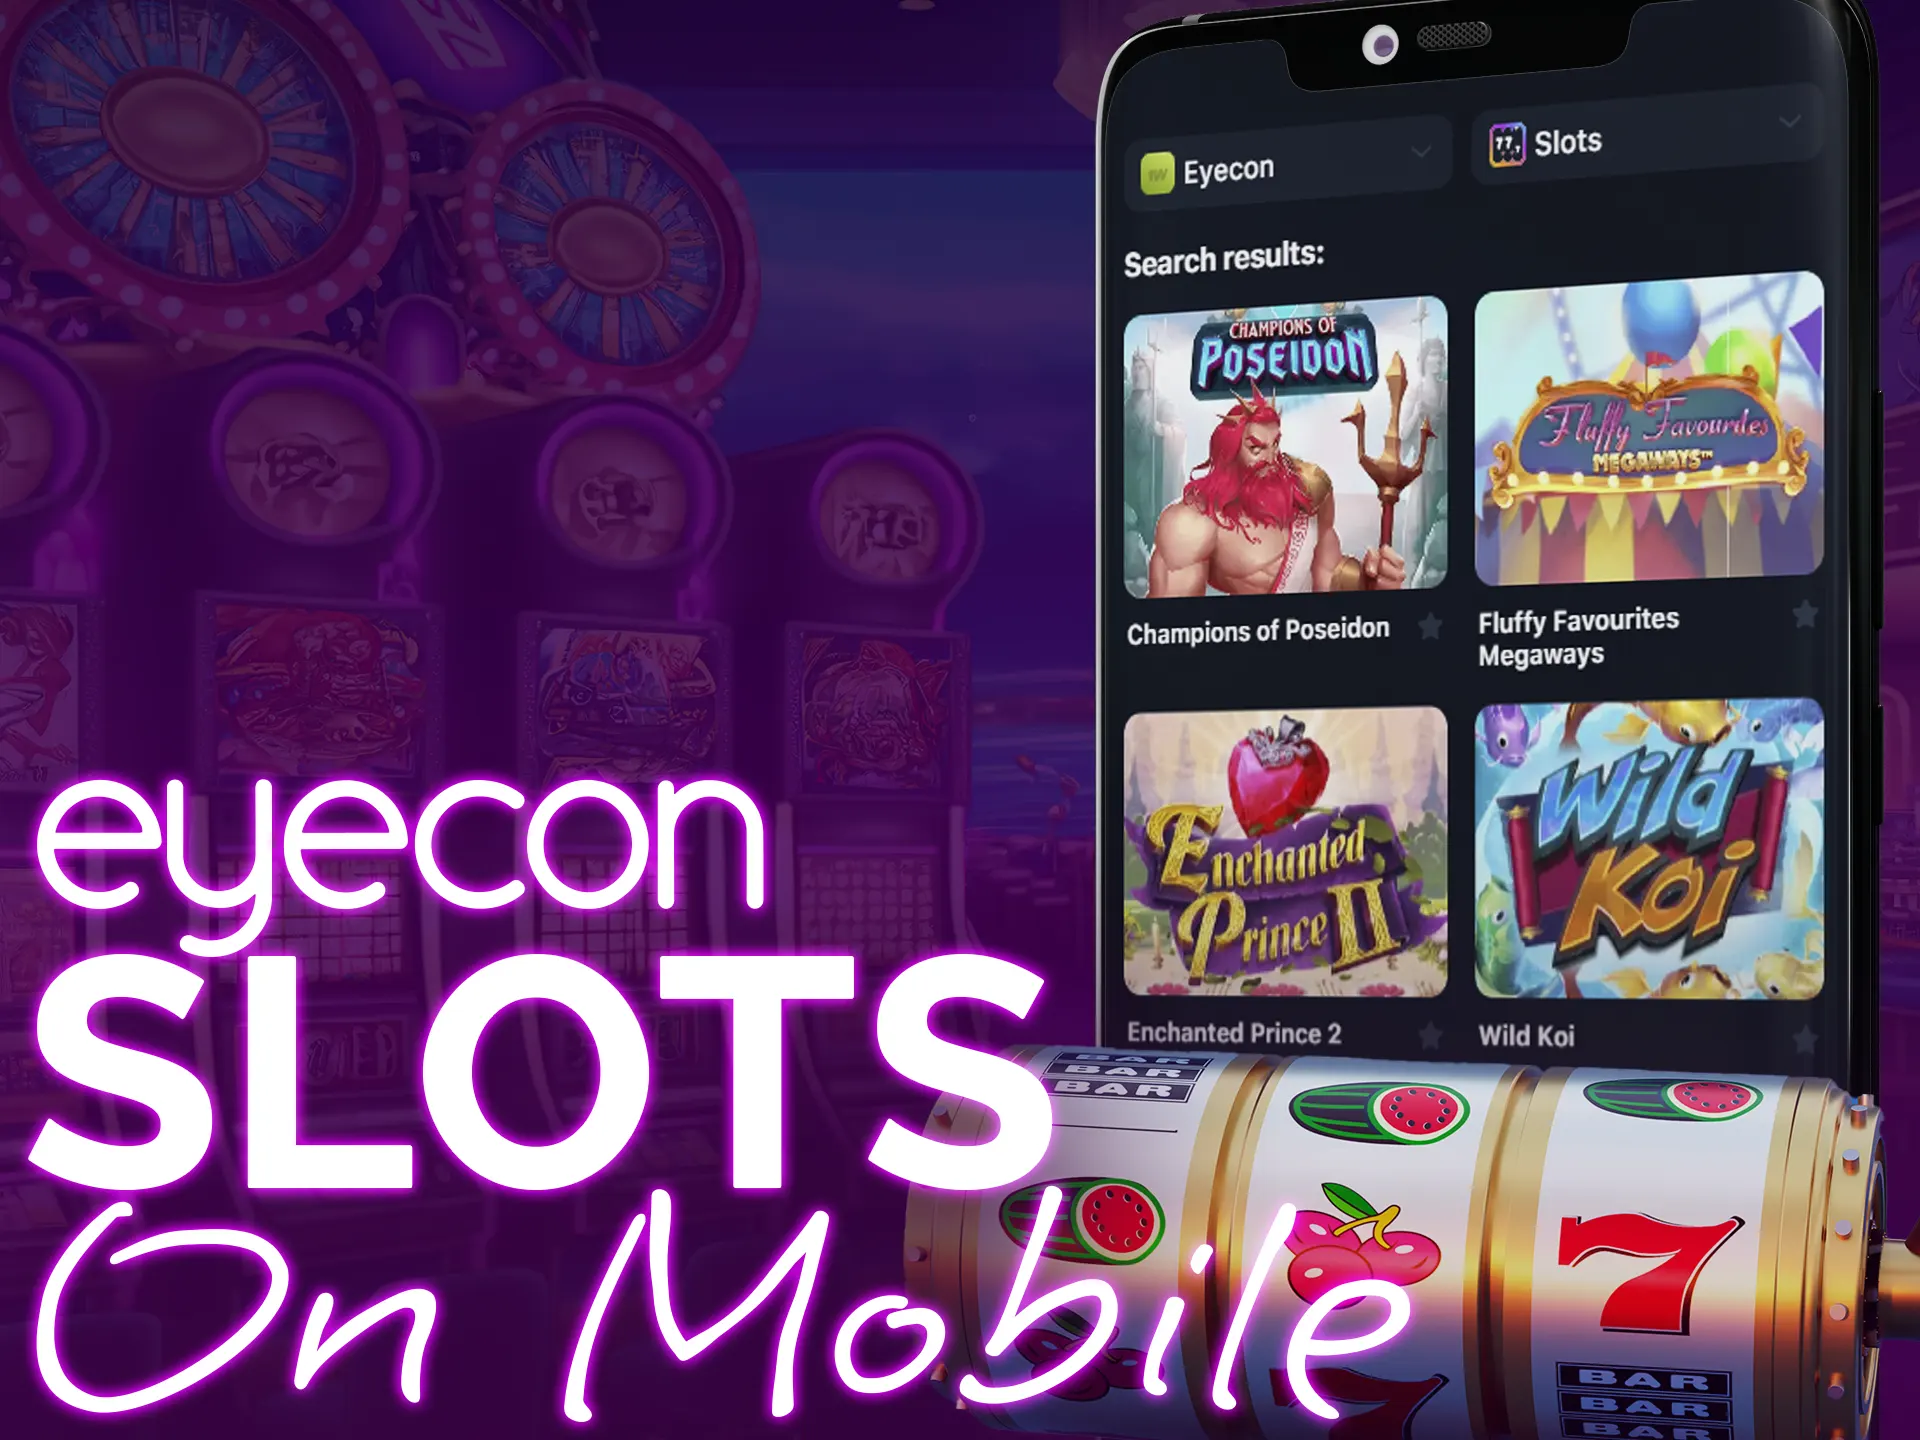 Eyecon gives option to play slots on mobile devices.